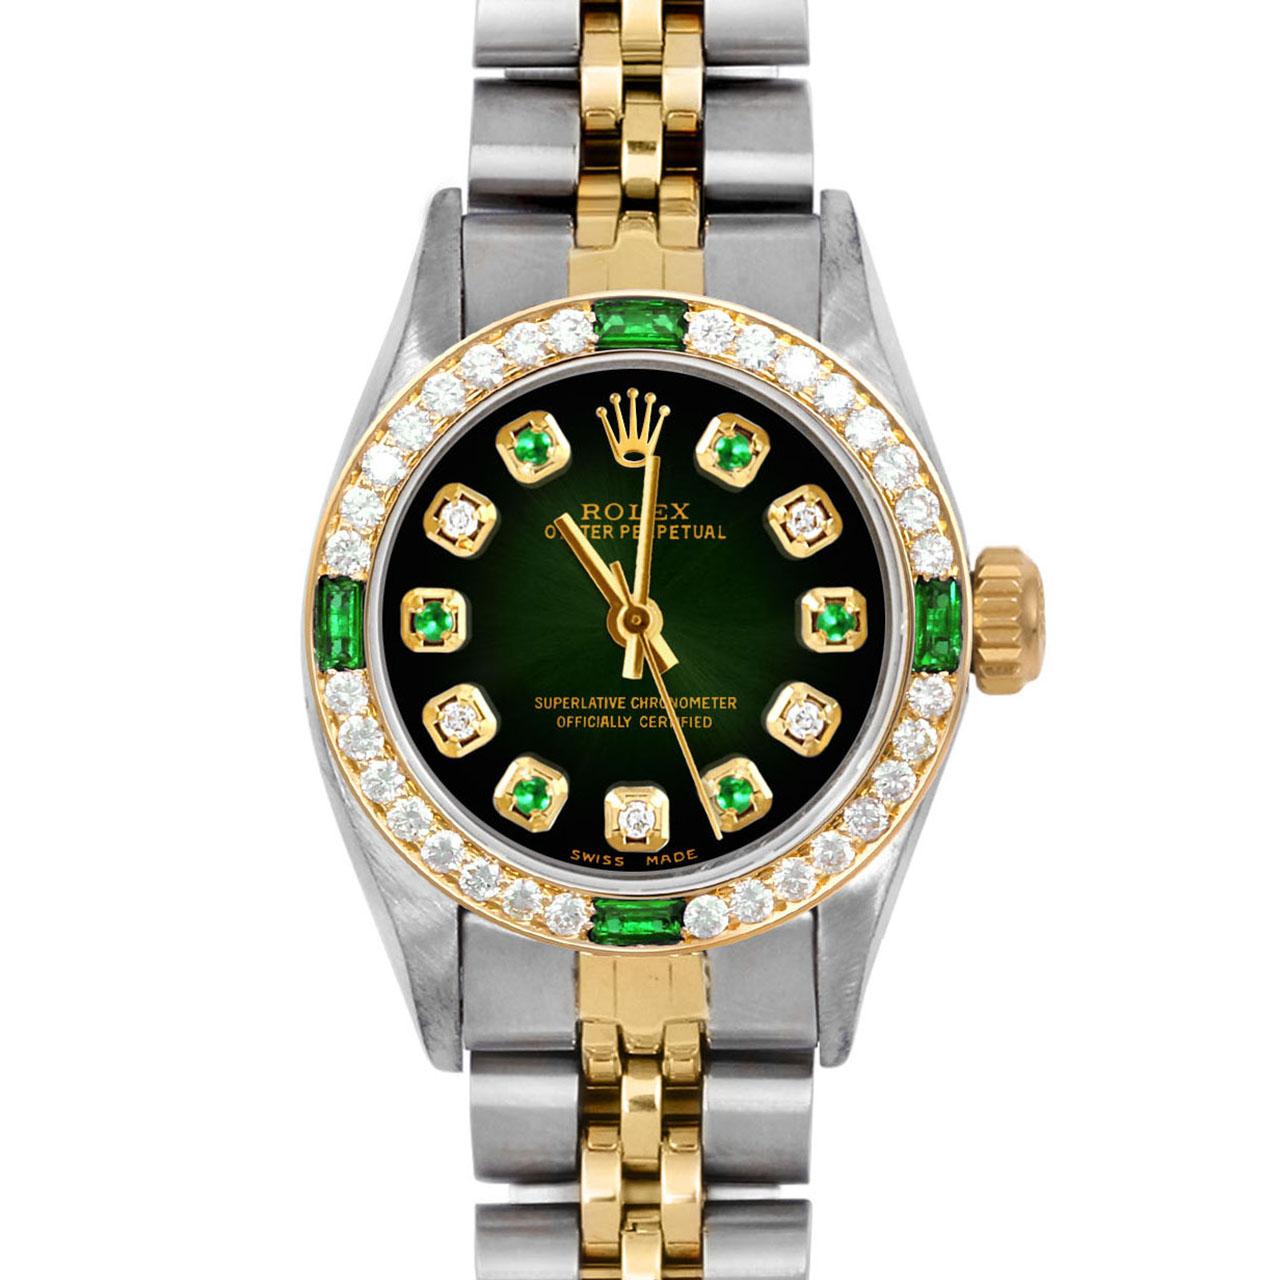 Brand : Rolex
Model : Oyster Perpetual 
Gender : Ladies
Metals : 14K Yellow Gold / Stainless Steel
Case Size : 24 mm
Dial : Custom Green Vignette Emerald Diamond Dial (This dial is not original Rolex And has been added aftermarket yet is a beautiful